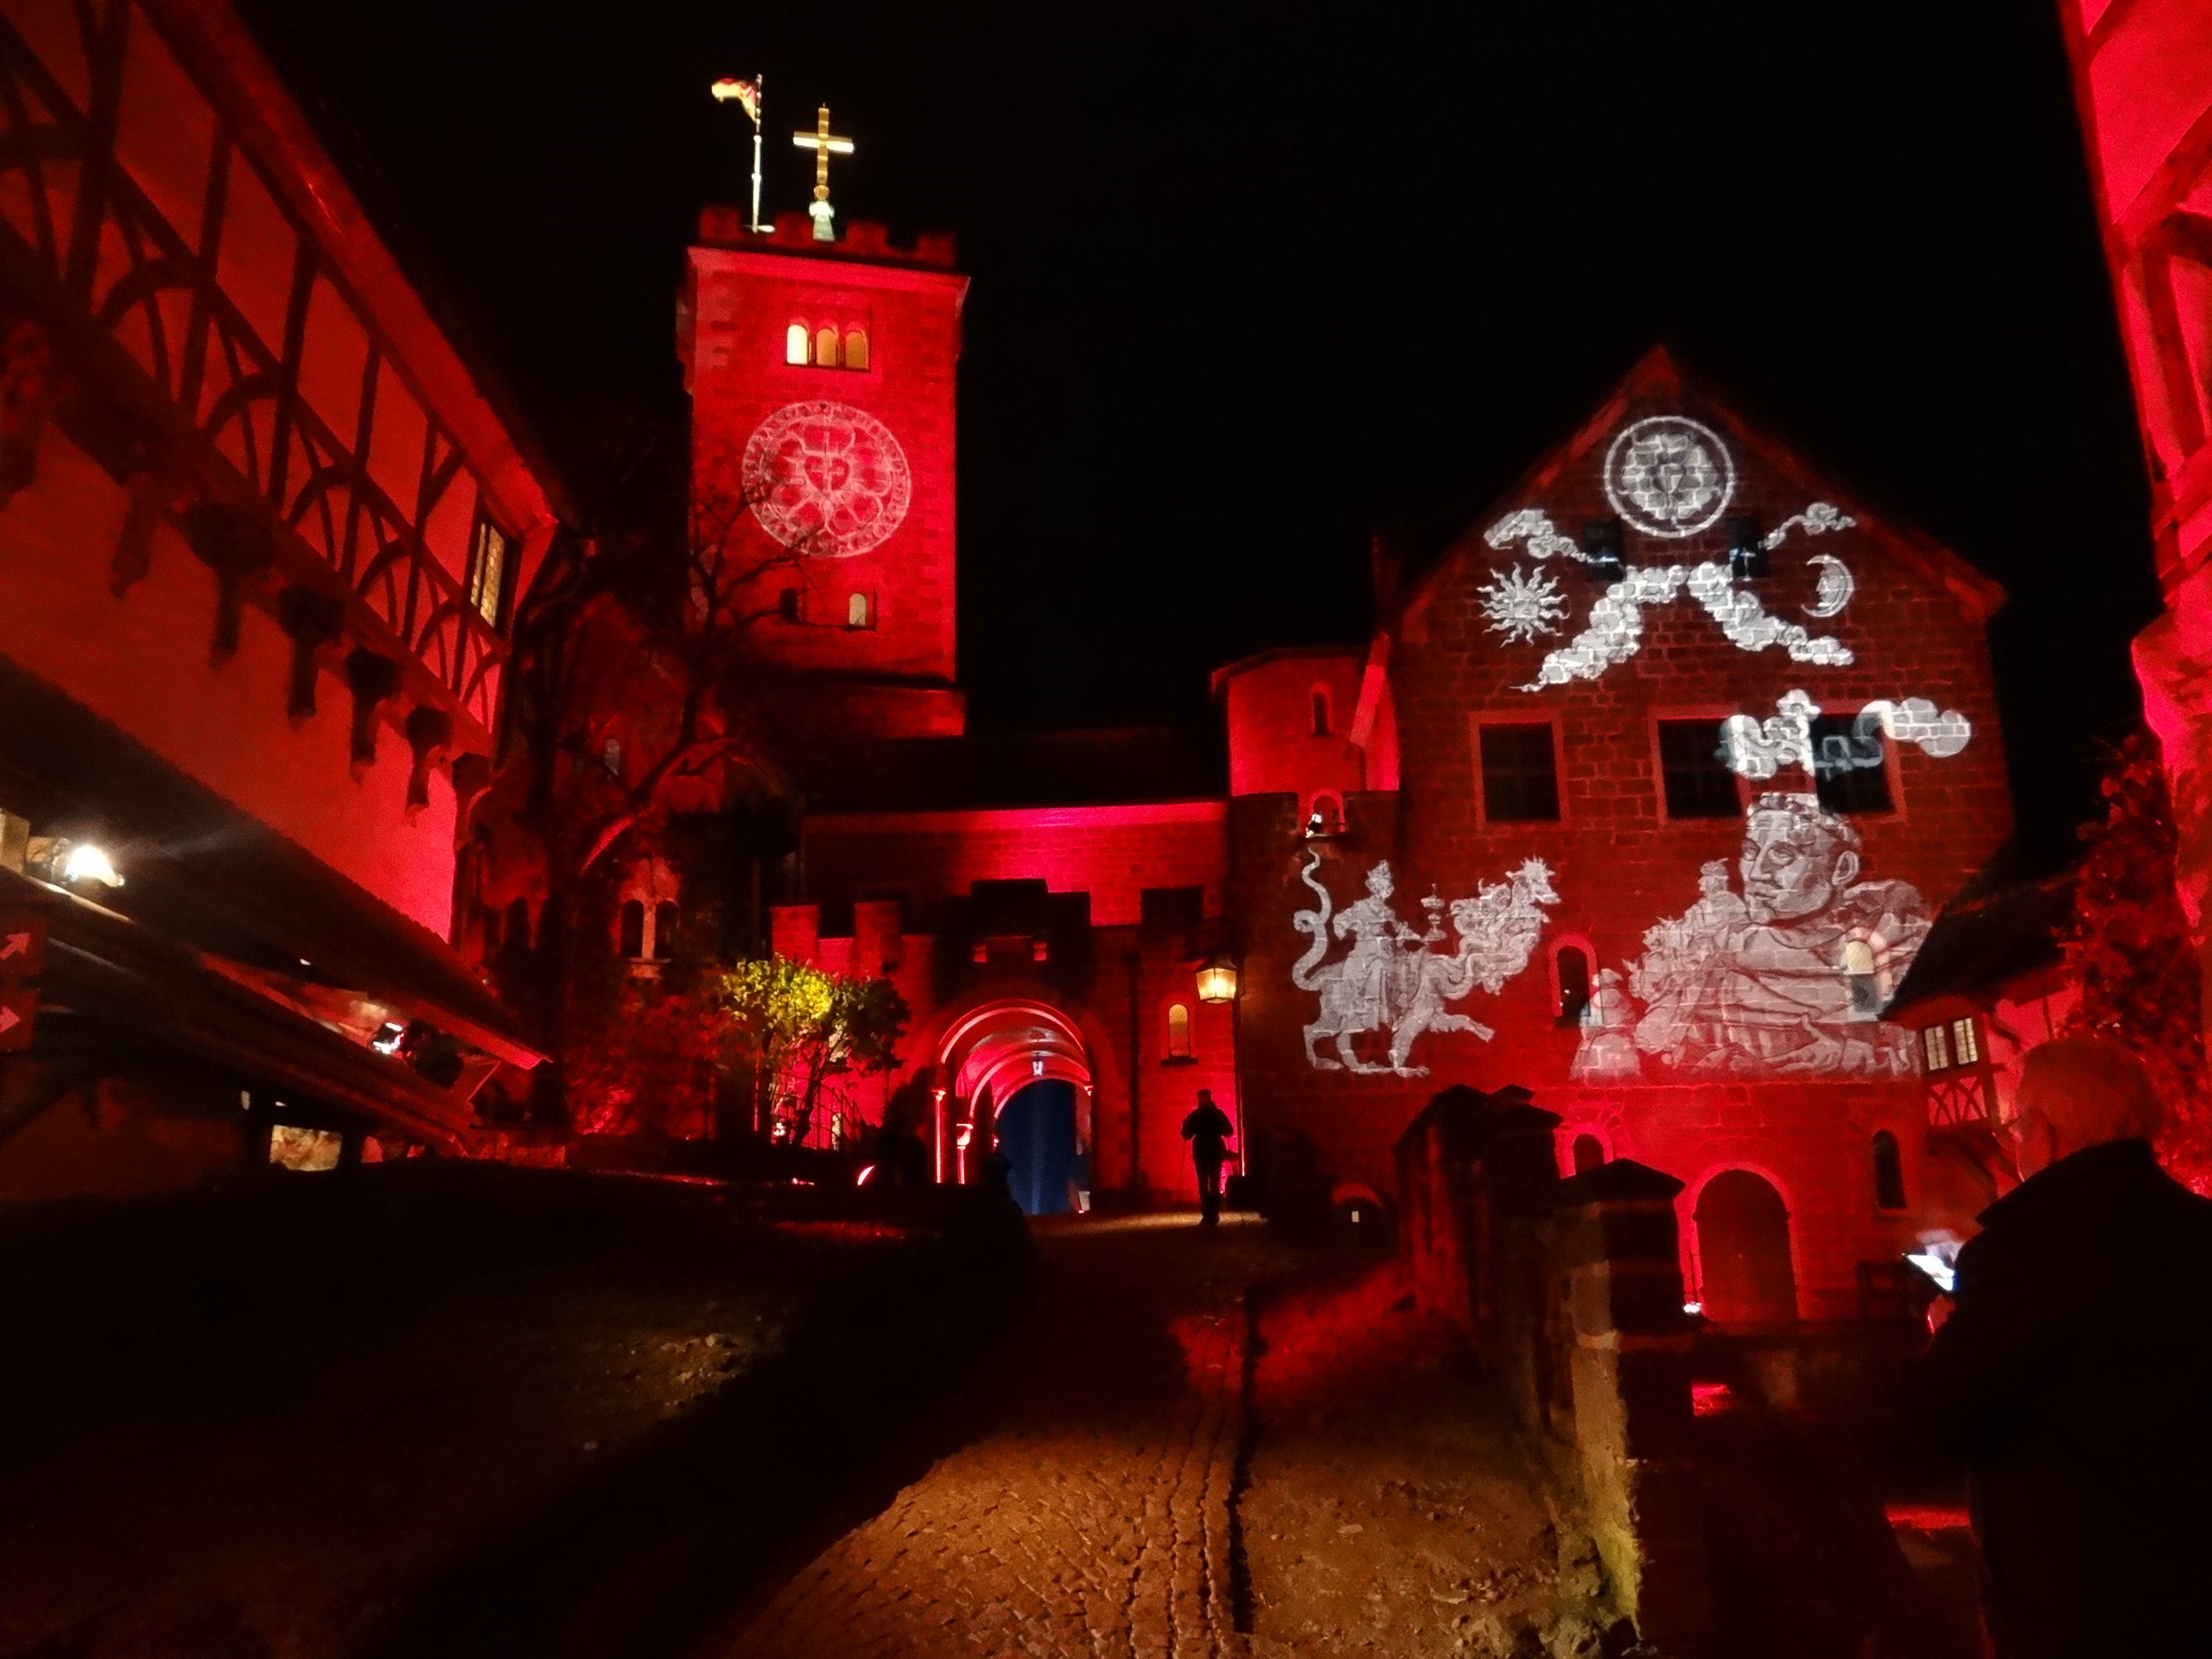 Spend the night in the Wartburg castle